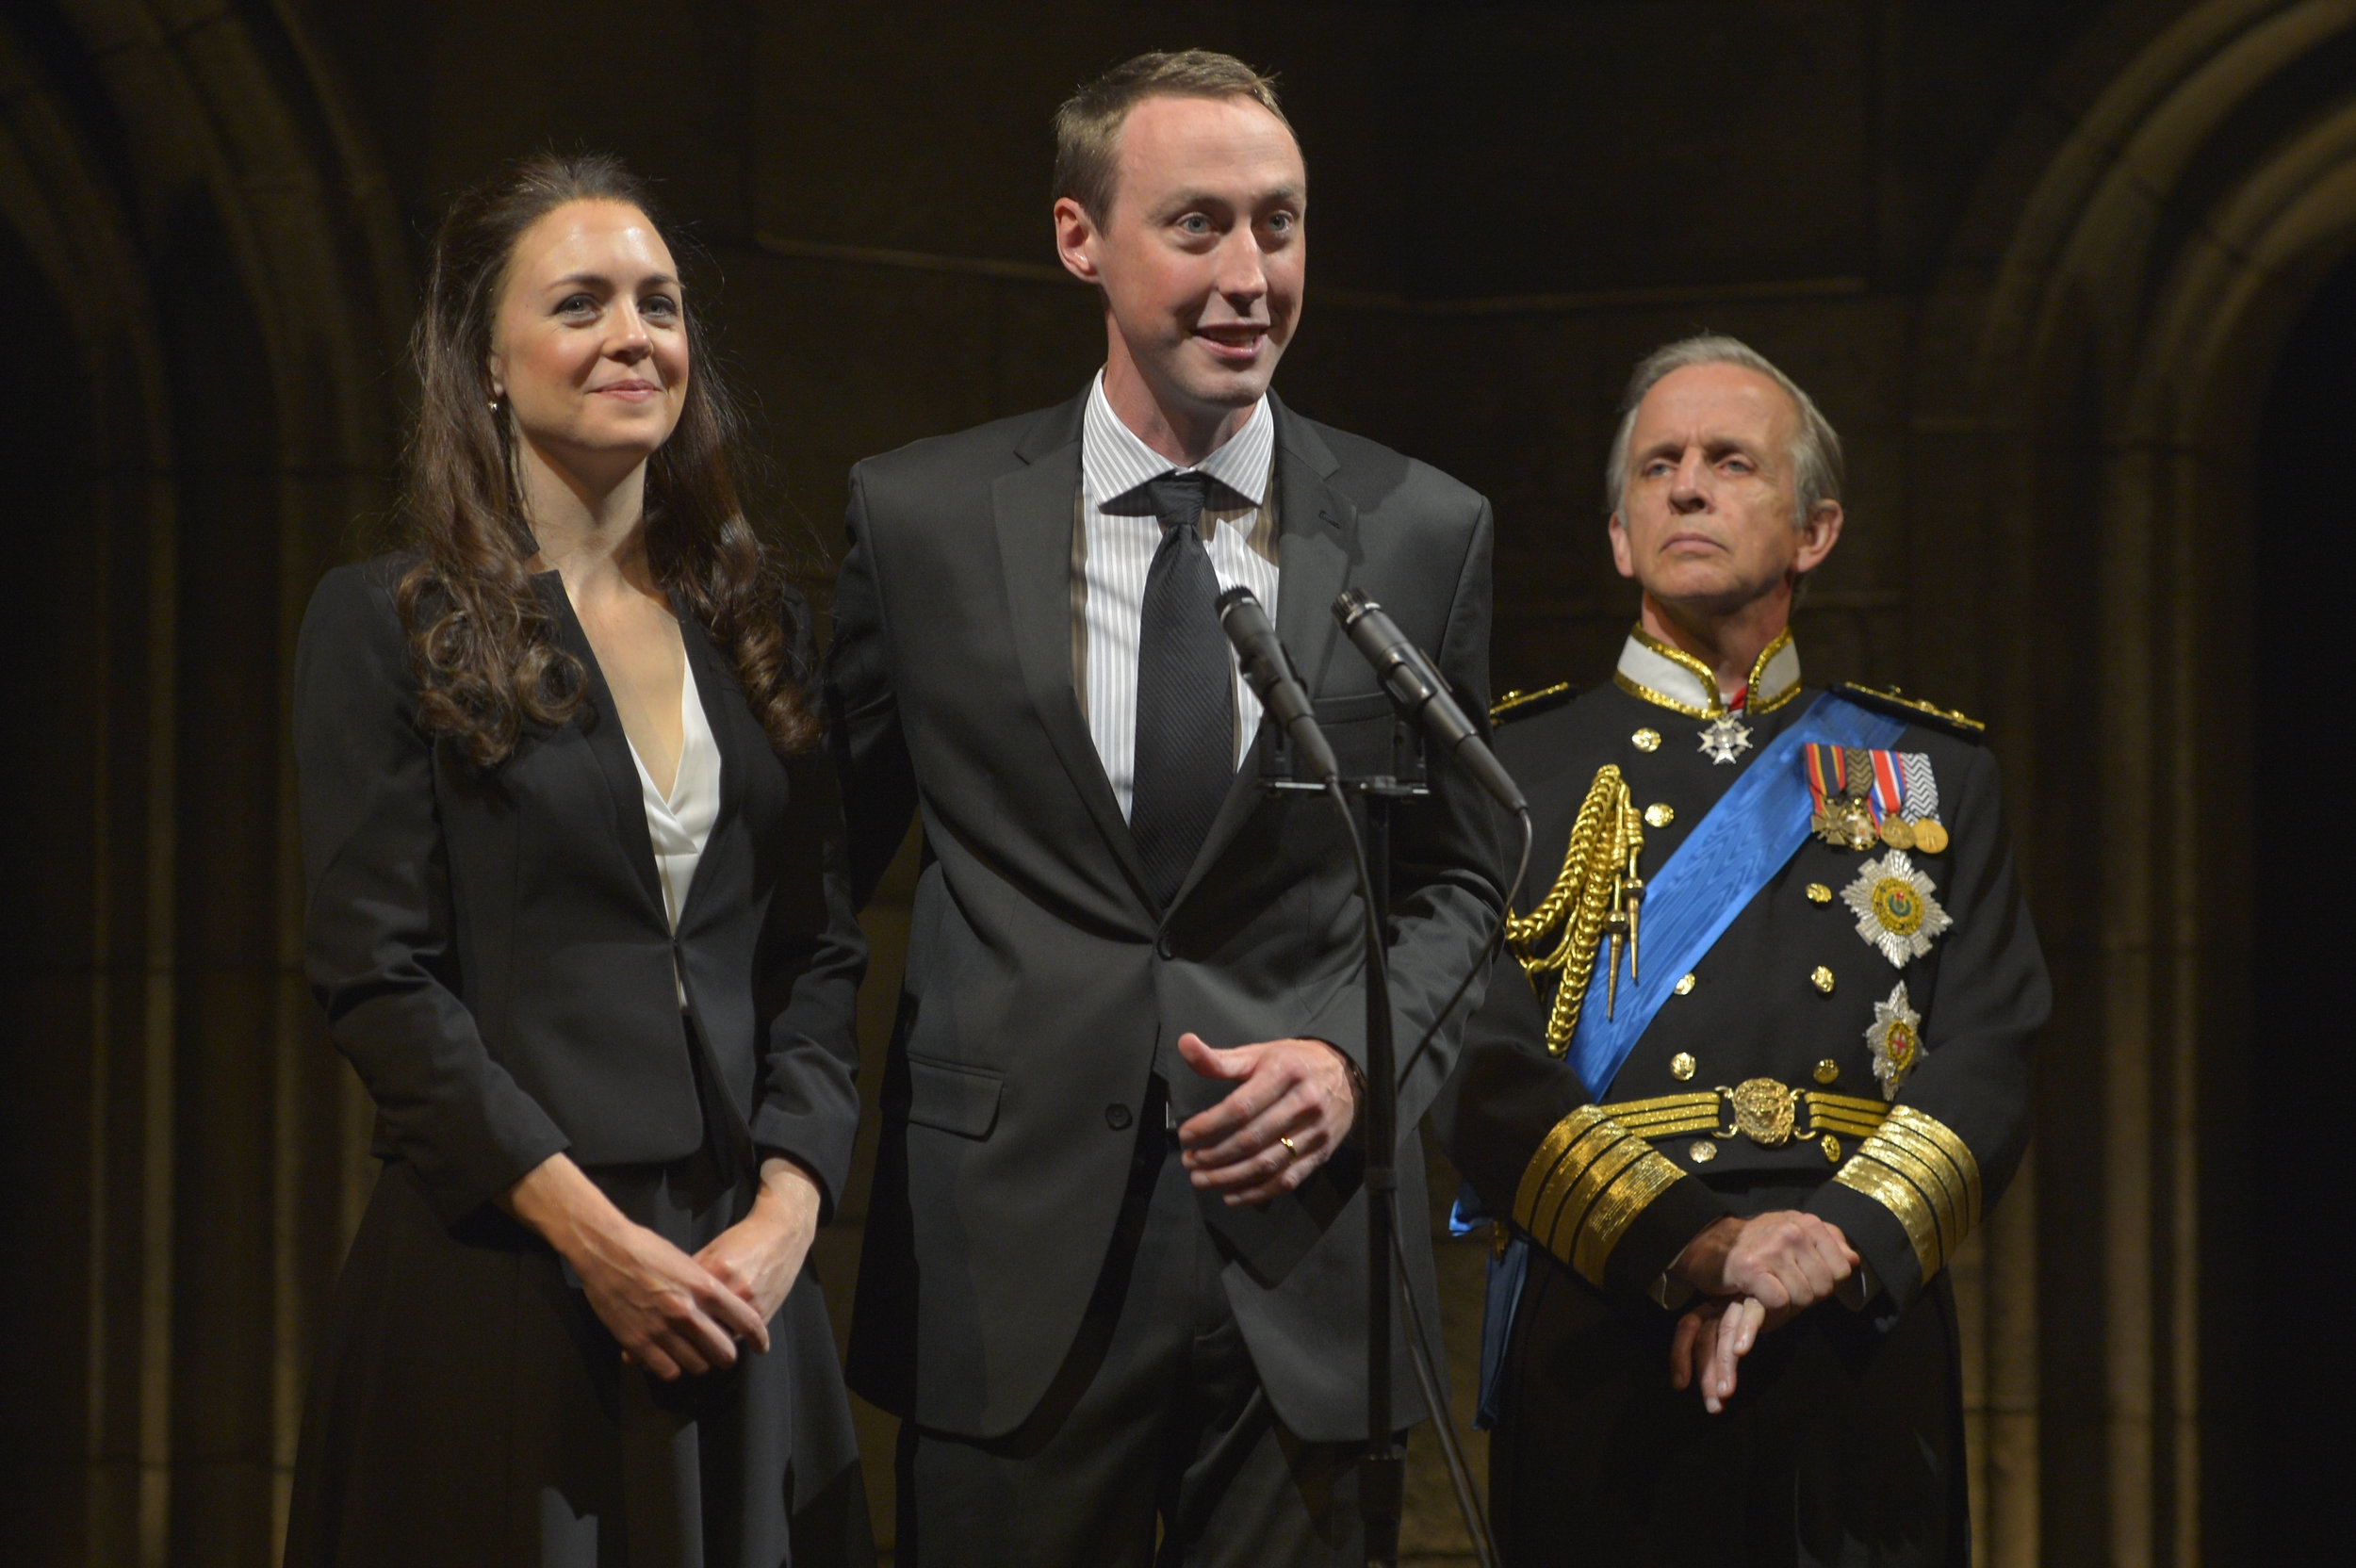  Allison Jean White, Christopher McLinden,&nbsp;and Robert Joy in the American Conservatory Theater production of  King Charles III , directed by David Muse. (Kevin Berne) 